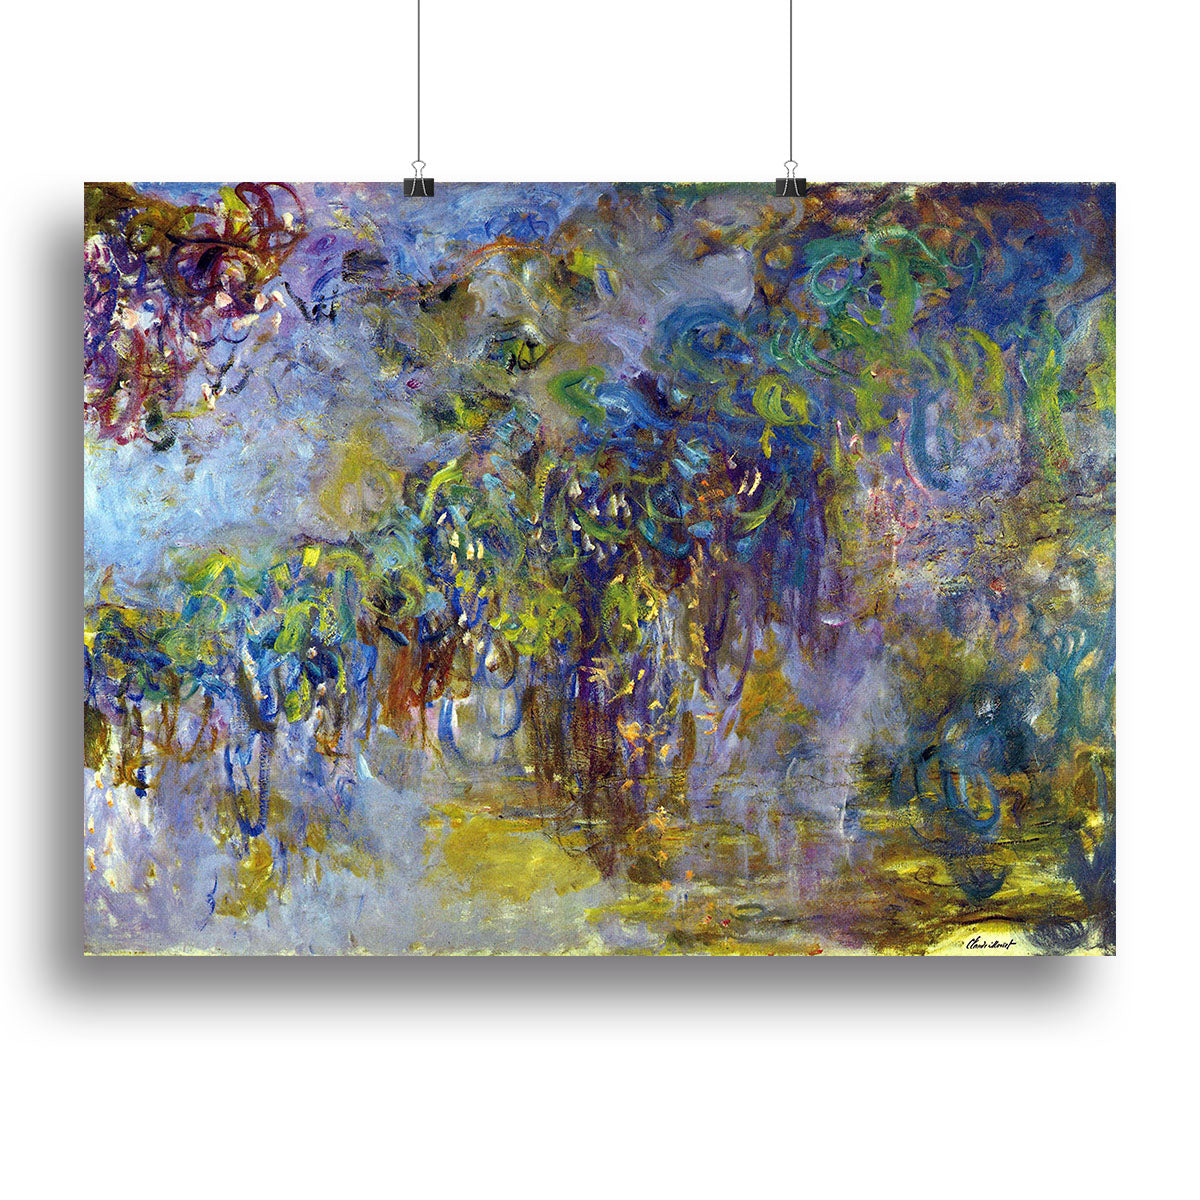 Wisteria 2 by Monet Canvas Print or Poster - Canvas Art Rocks - 2